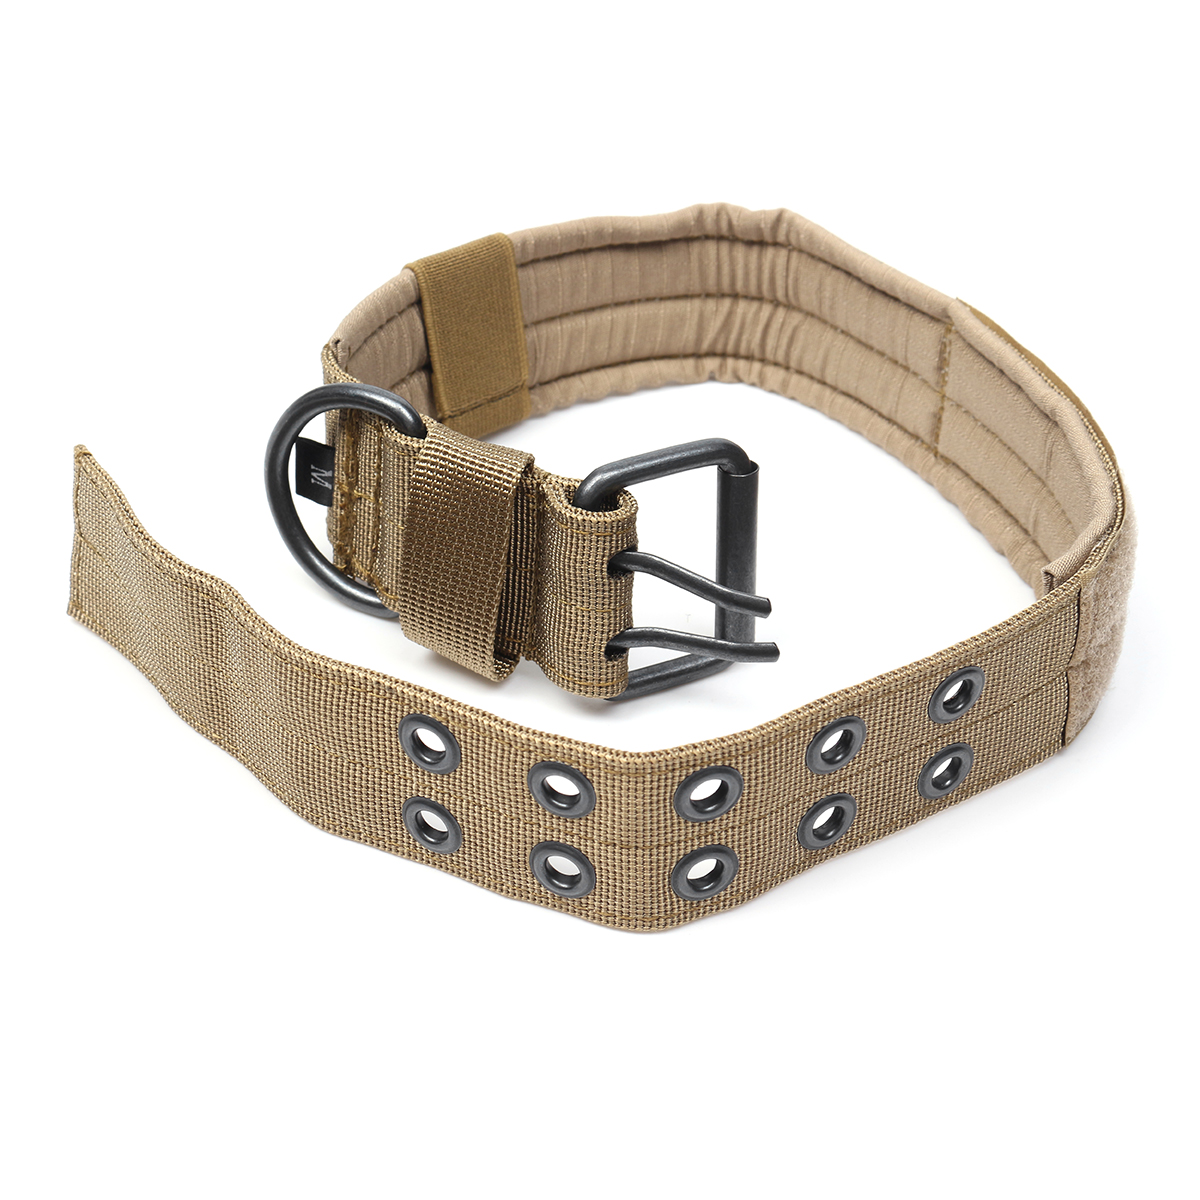 Adjustable-Training-Dog-Collar-Nylon-Tactical-Dog-Collar-Military-With-Metal-D-Ring-Buckle-1366535-5